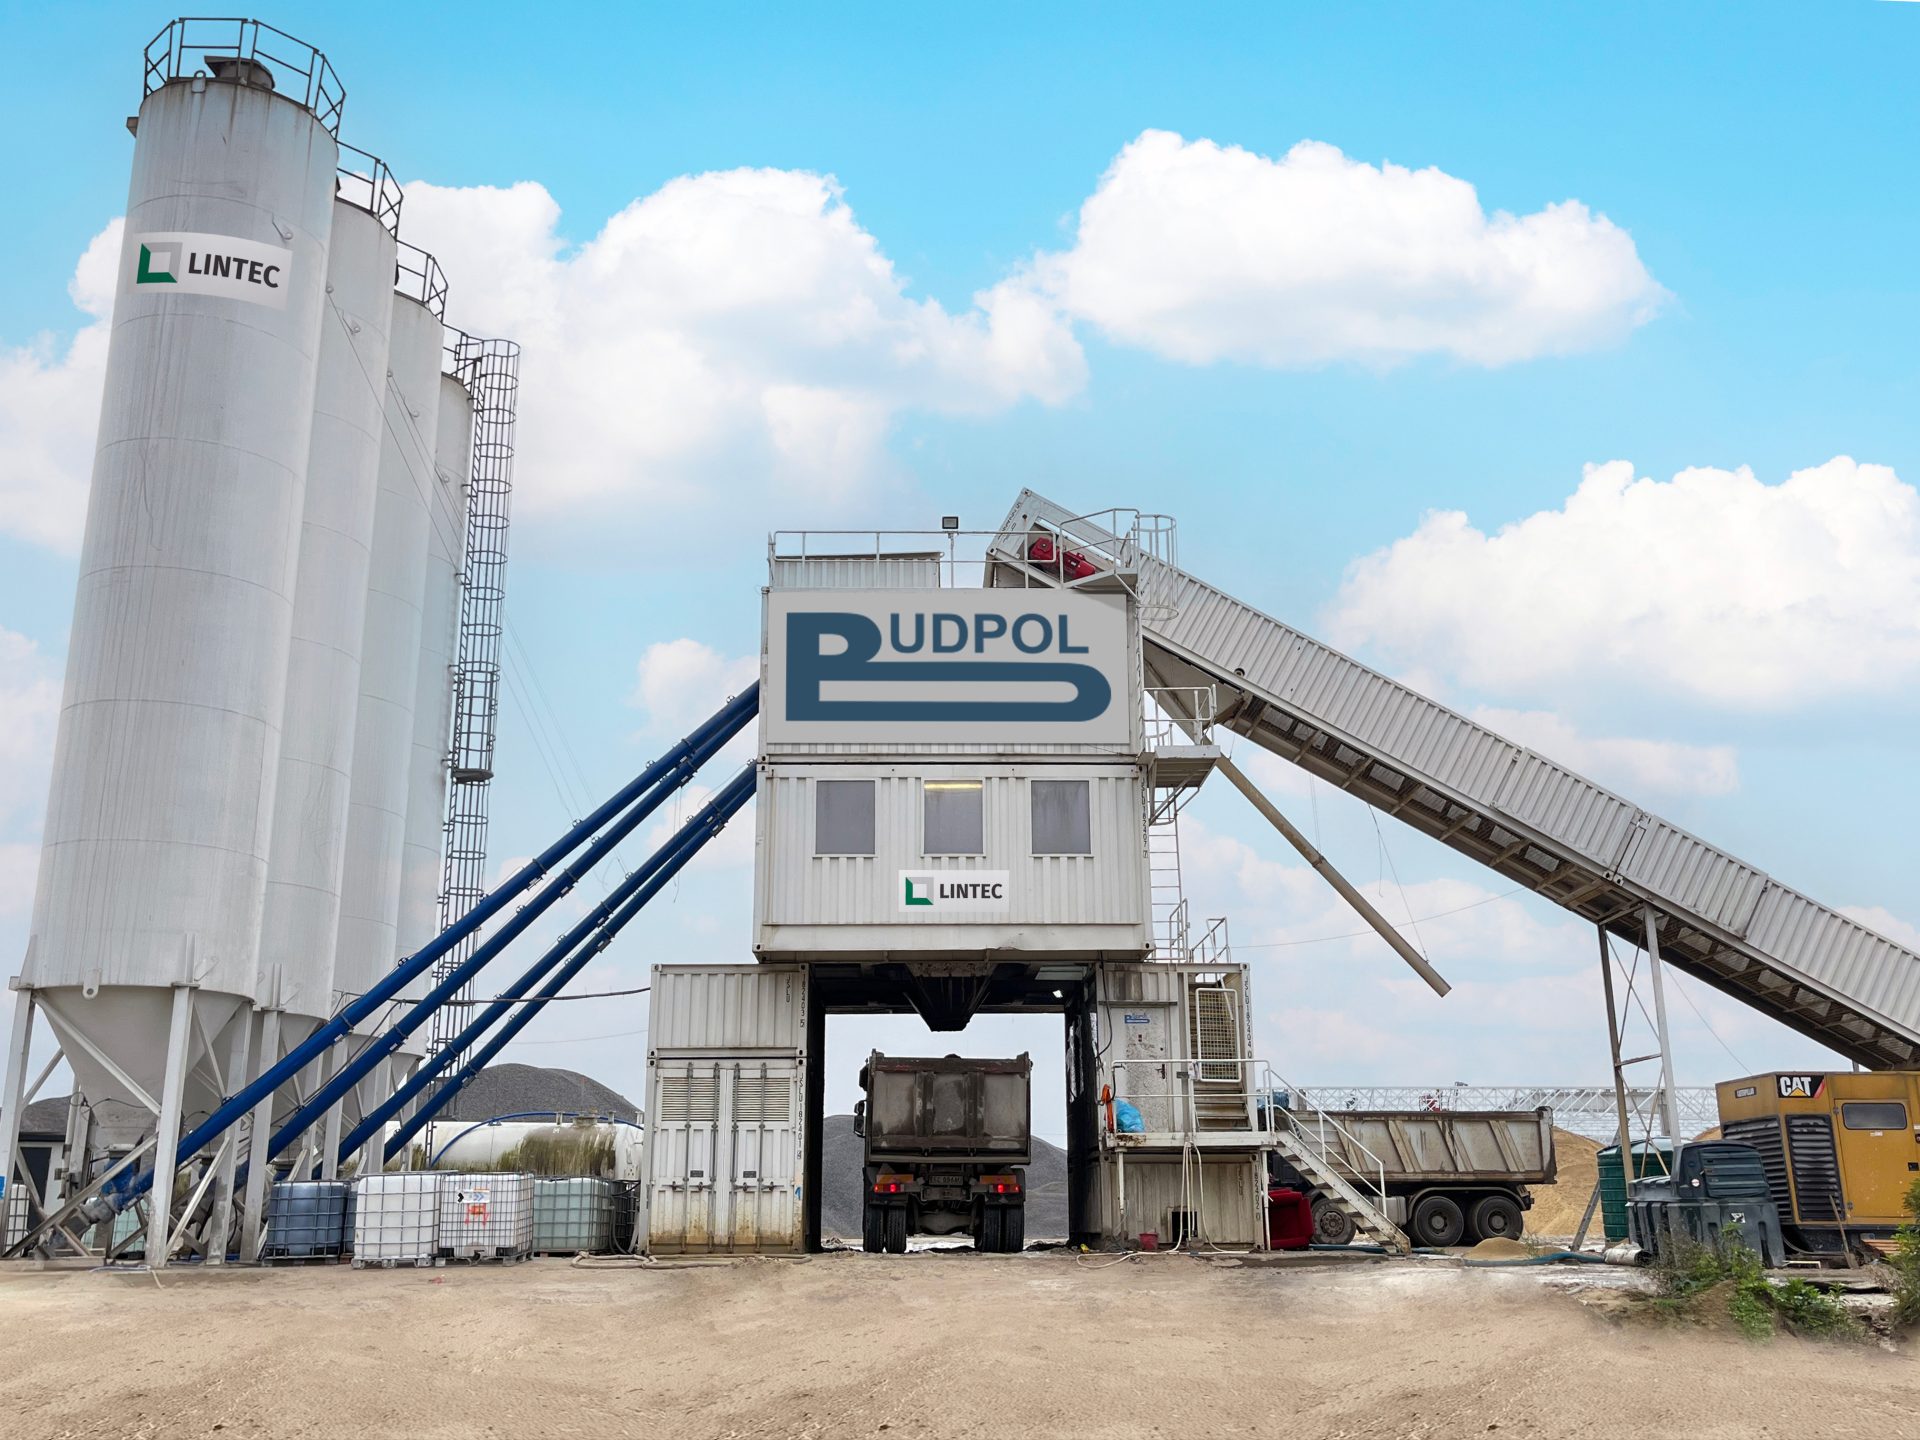 Polish contractor Budpol uses Lintec plants on multiple road expansion projects 